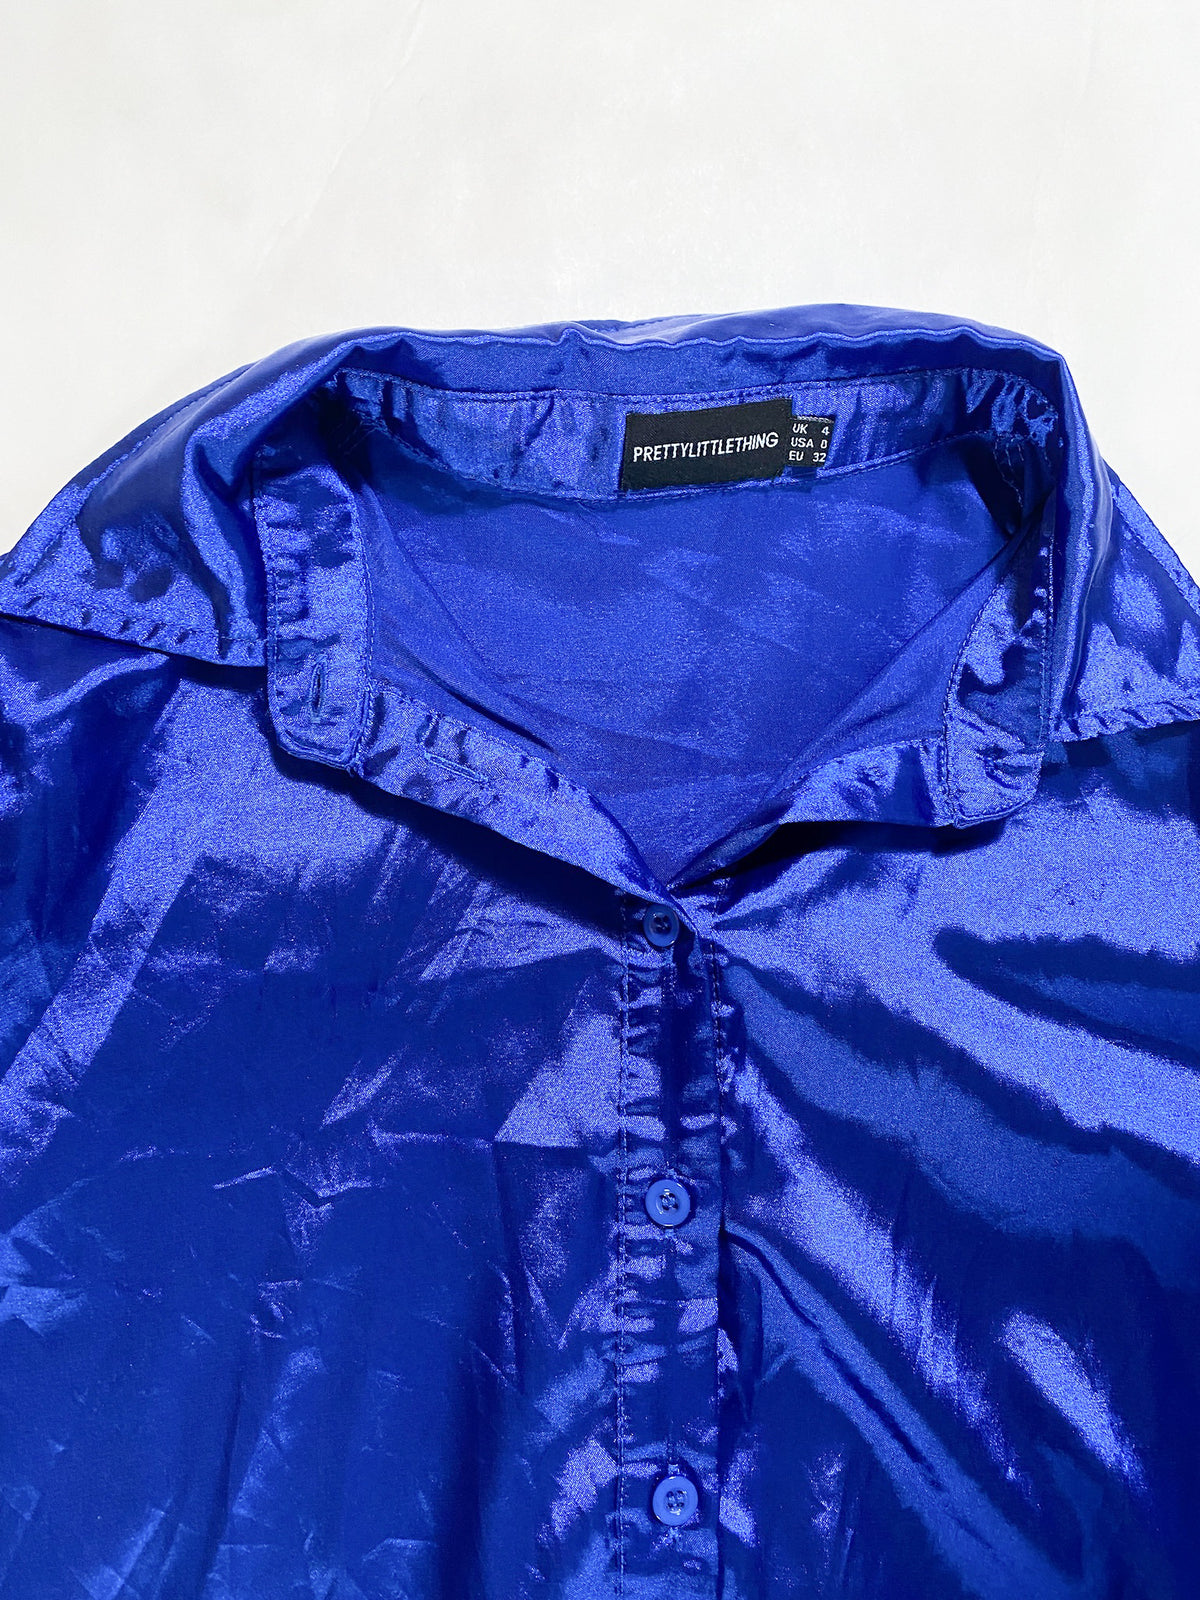 Pretty Little Thing- Blue Satin Button Up